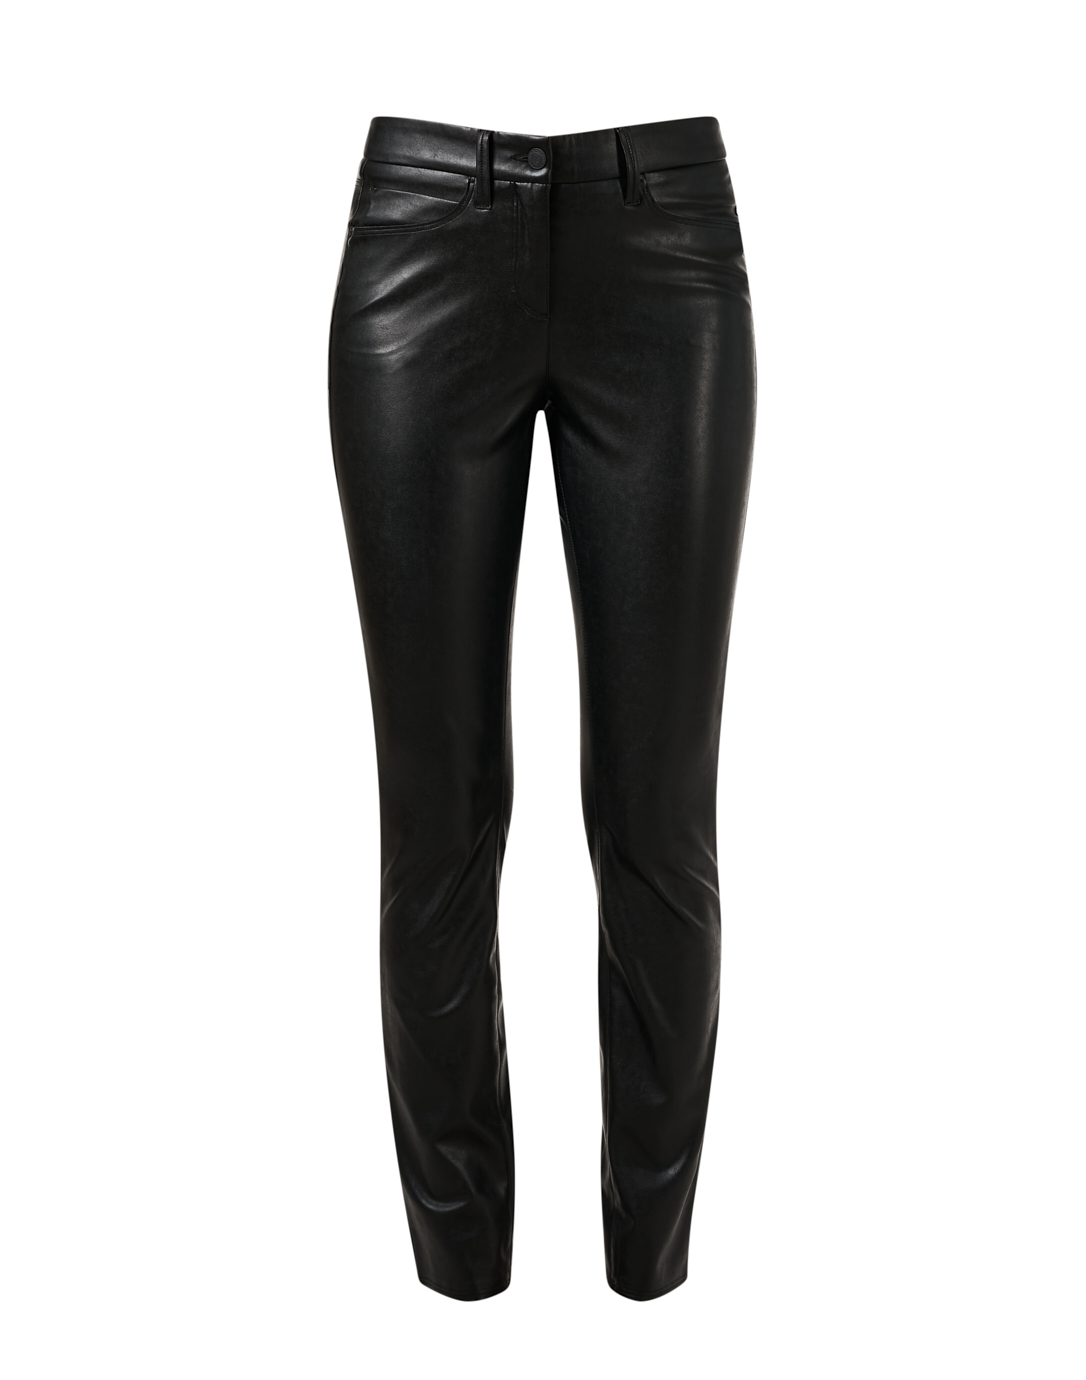 Black Leather Pants For Women